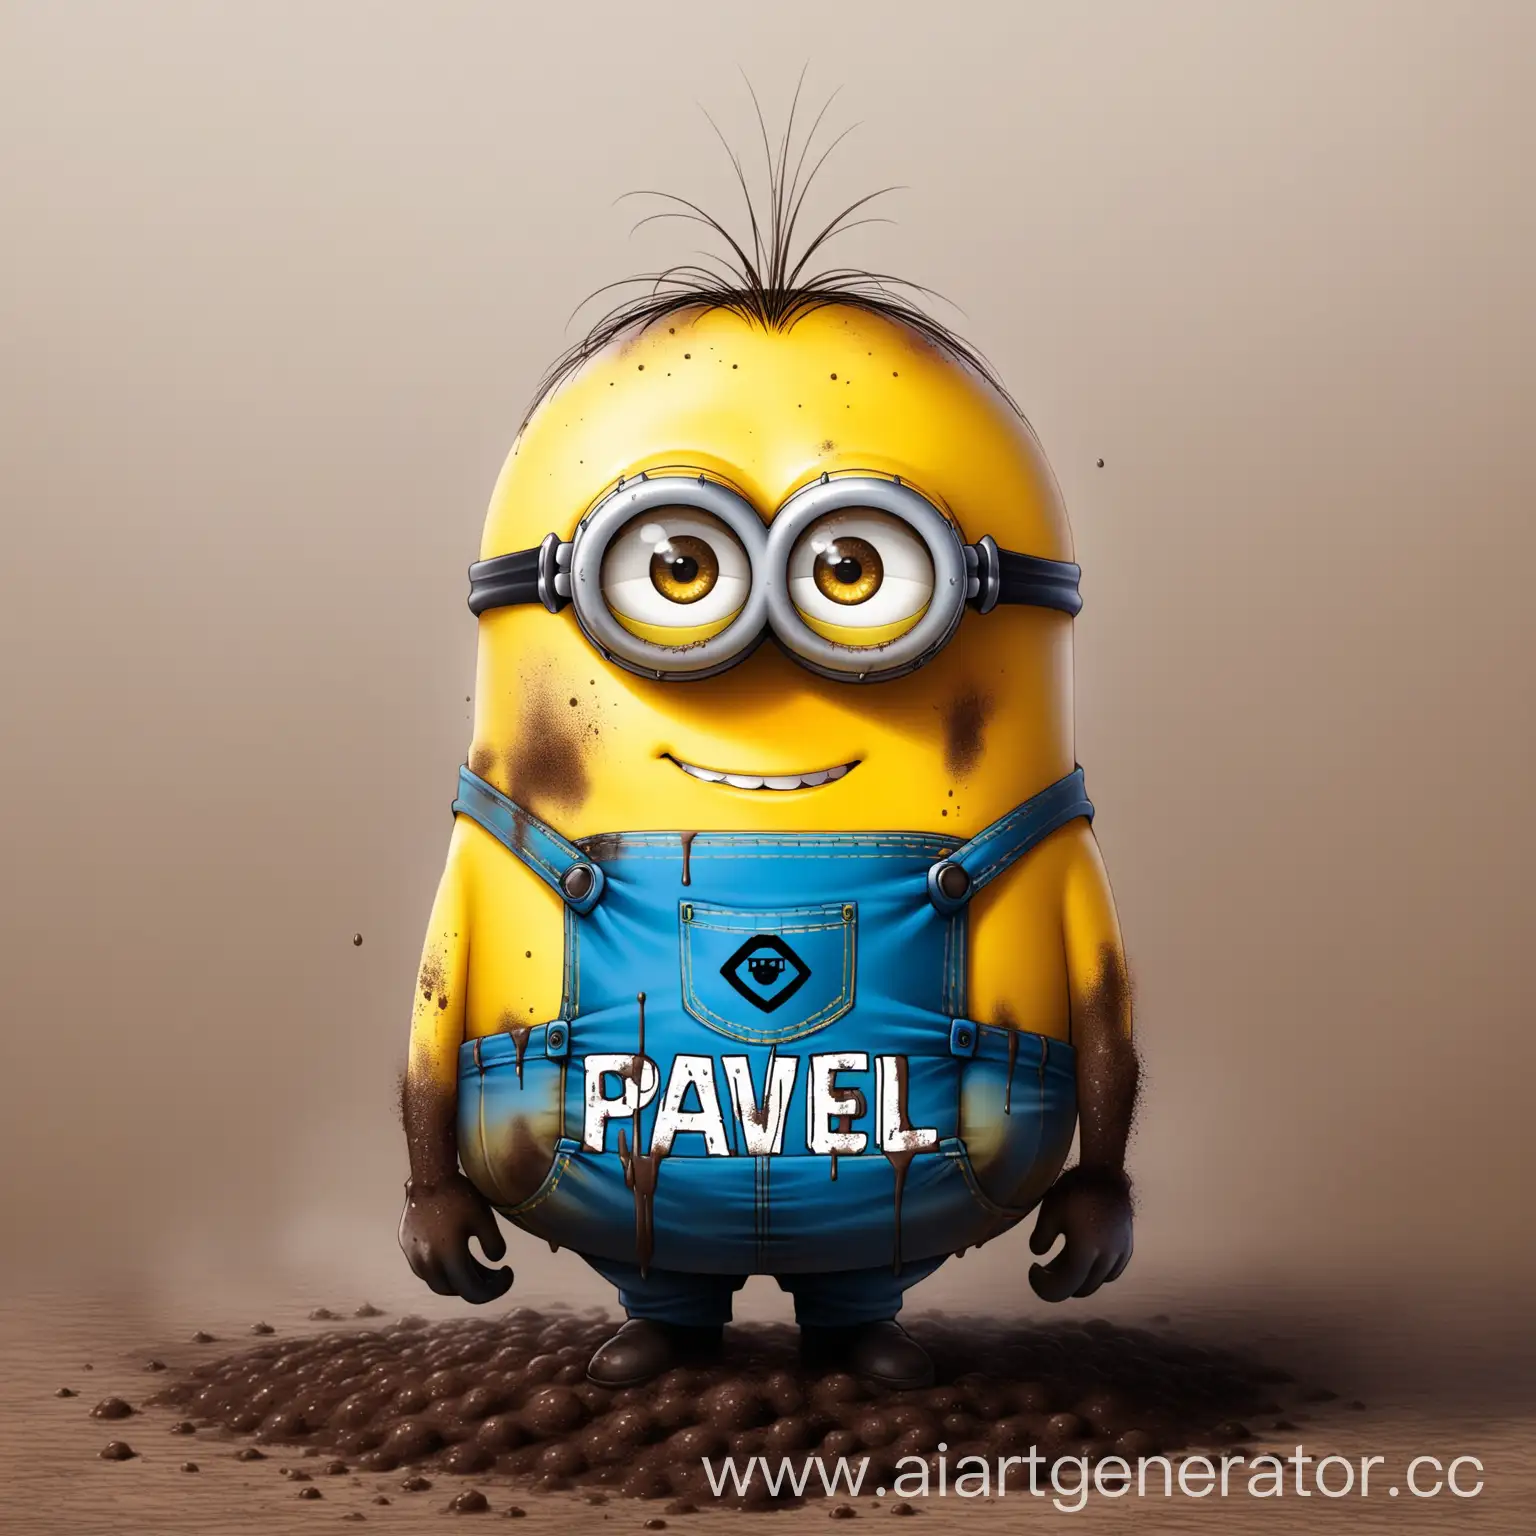 Playful-Minion-Covered-in-Dirt-with-Pavel-Inscription